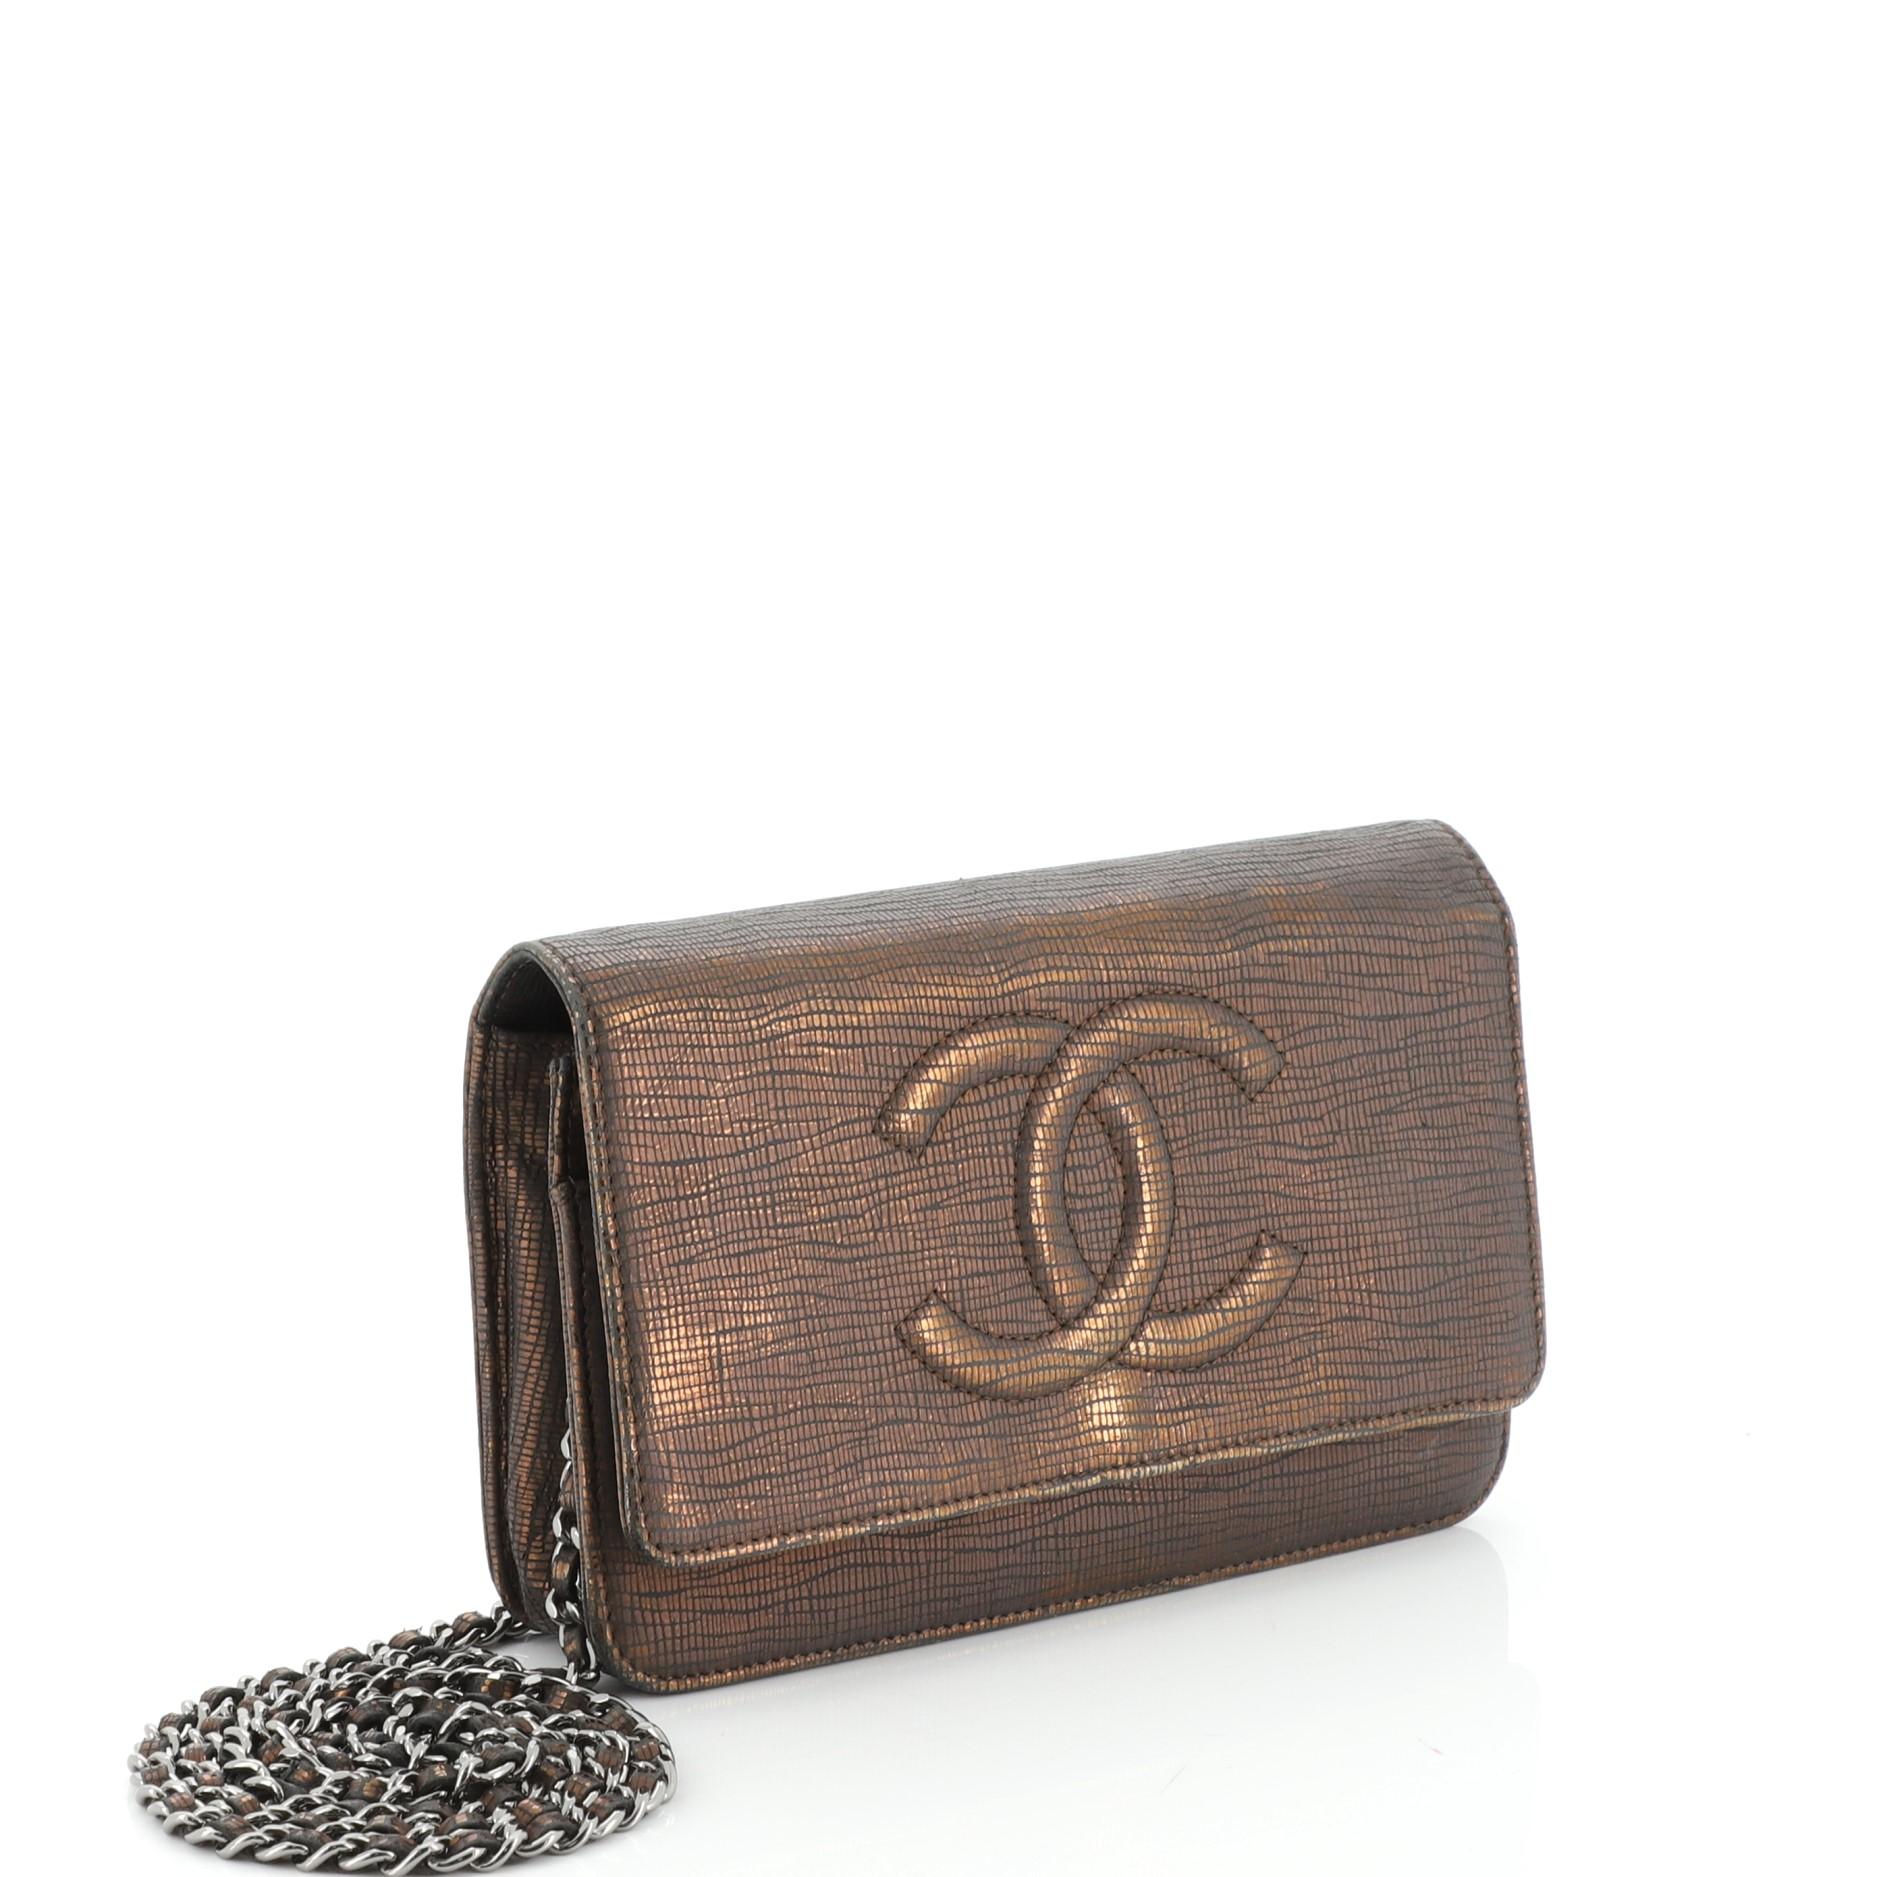 This Chanel Timeless Wallet on Chain Textured Leather, crafted in metallic brown textured leather, features woven-in leather chain strap, interlocking CC logo stitched on front and silver-tone hardware. Its snap button closure opens to a black